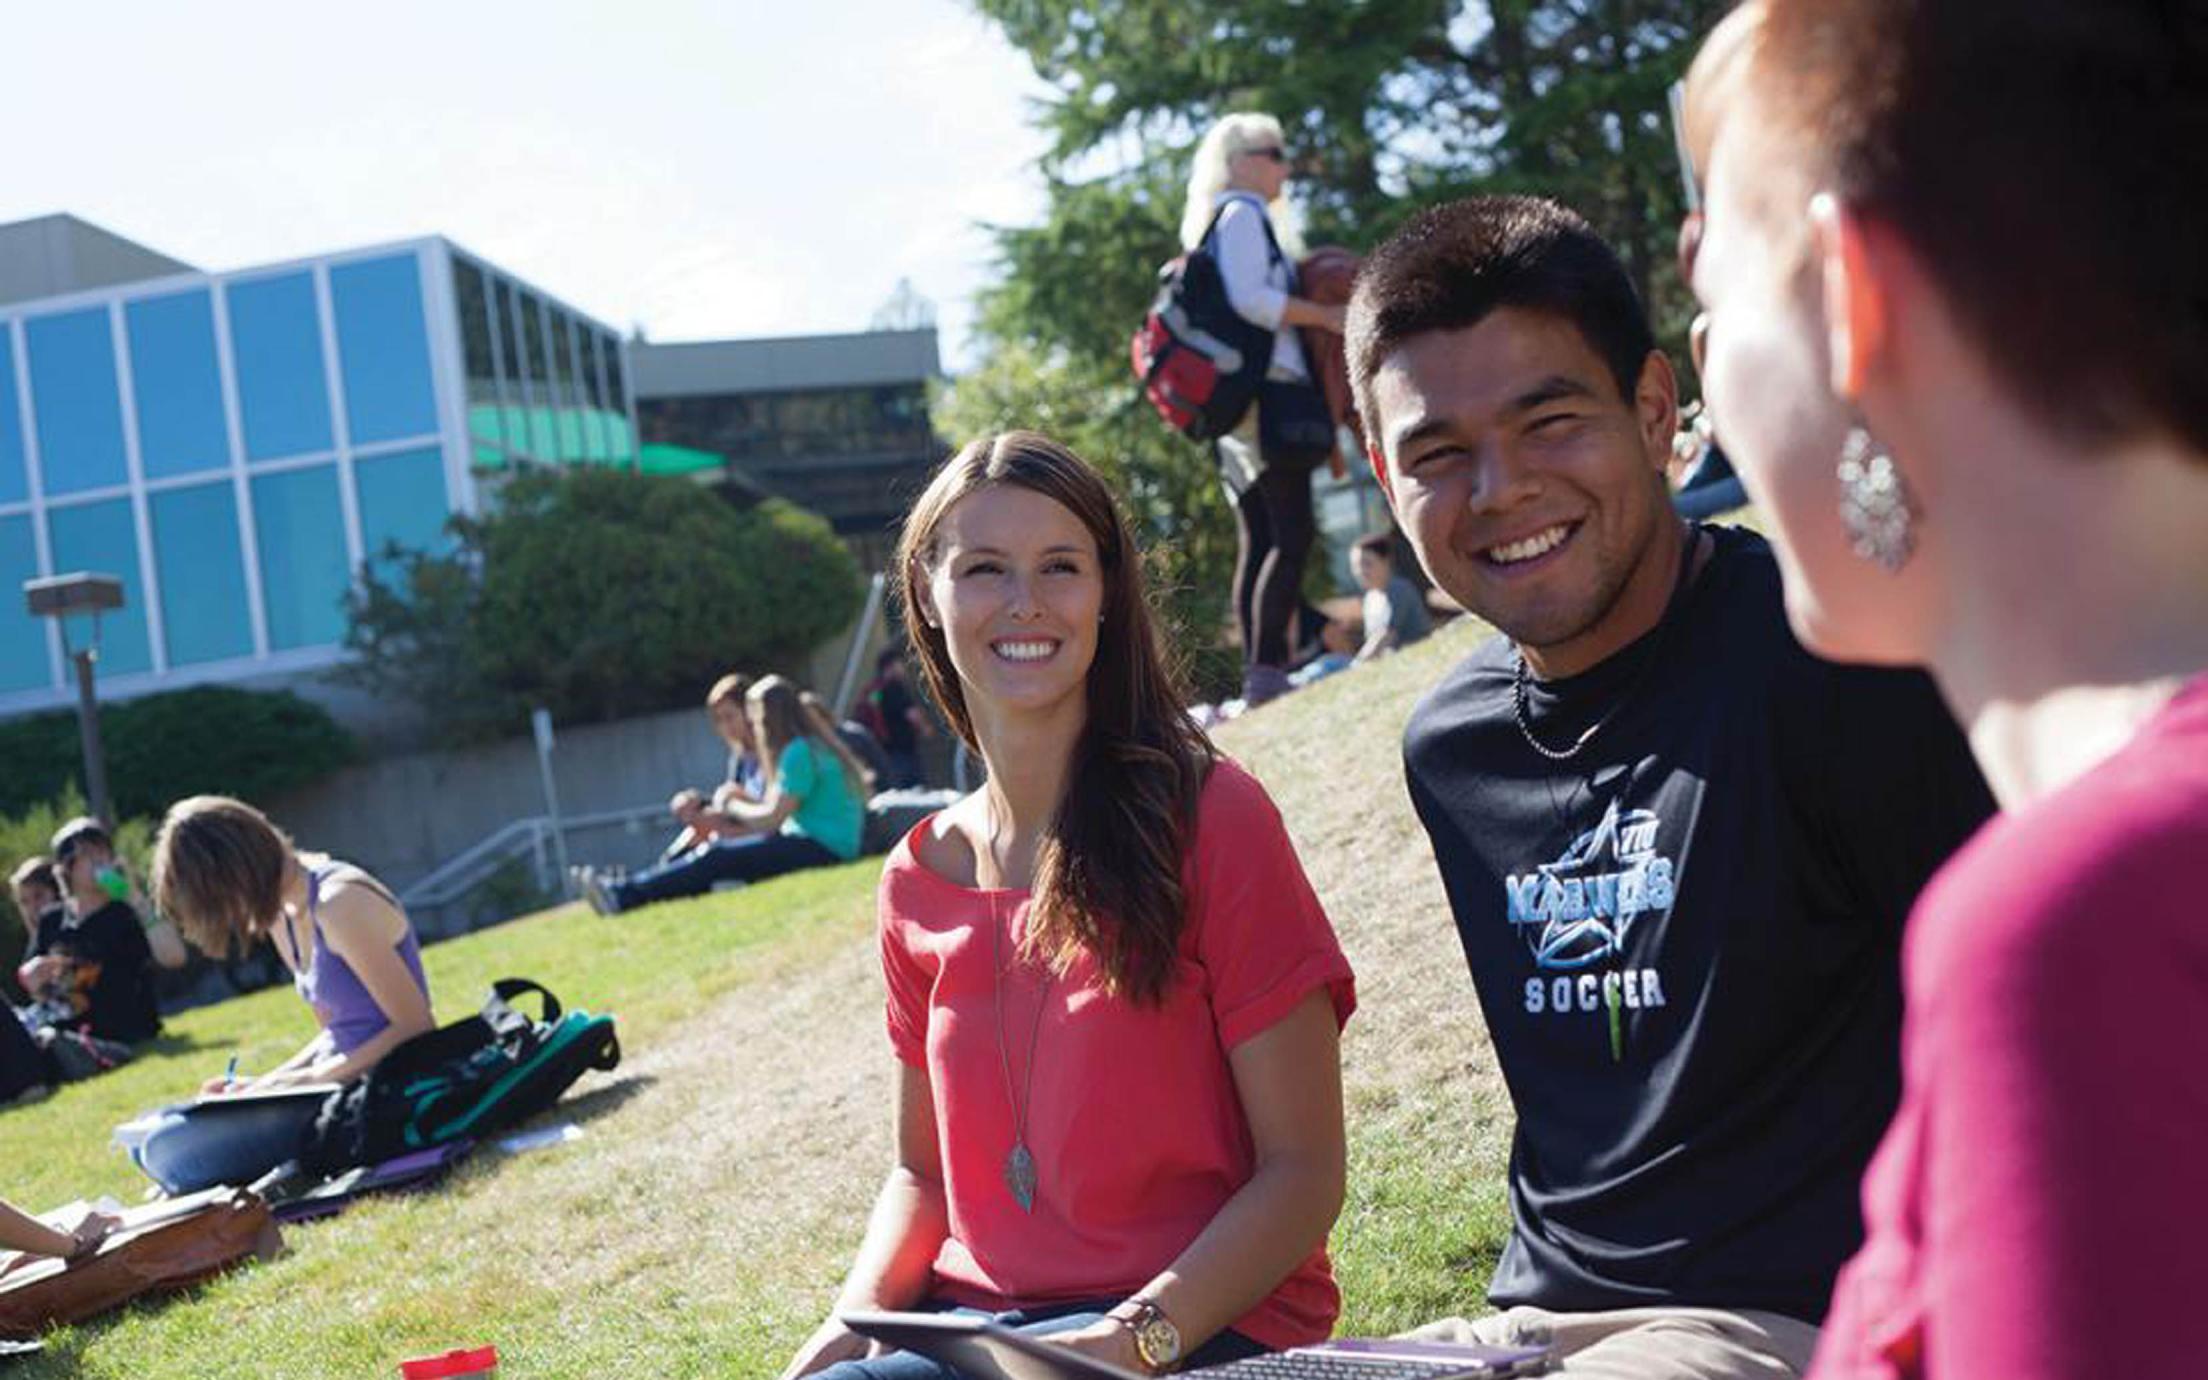 Students of VIU's sport science courses gathering at VIU's campus